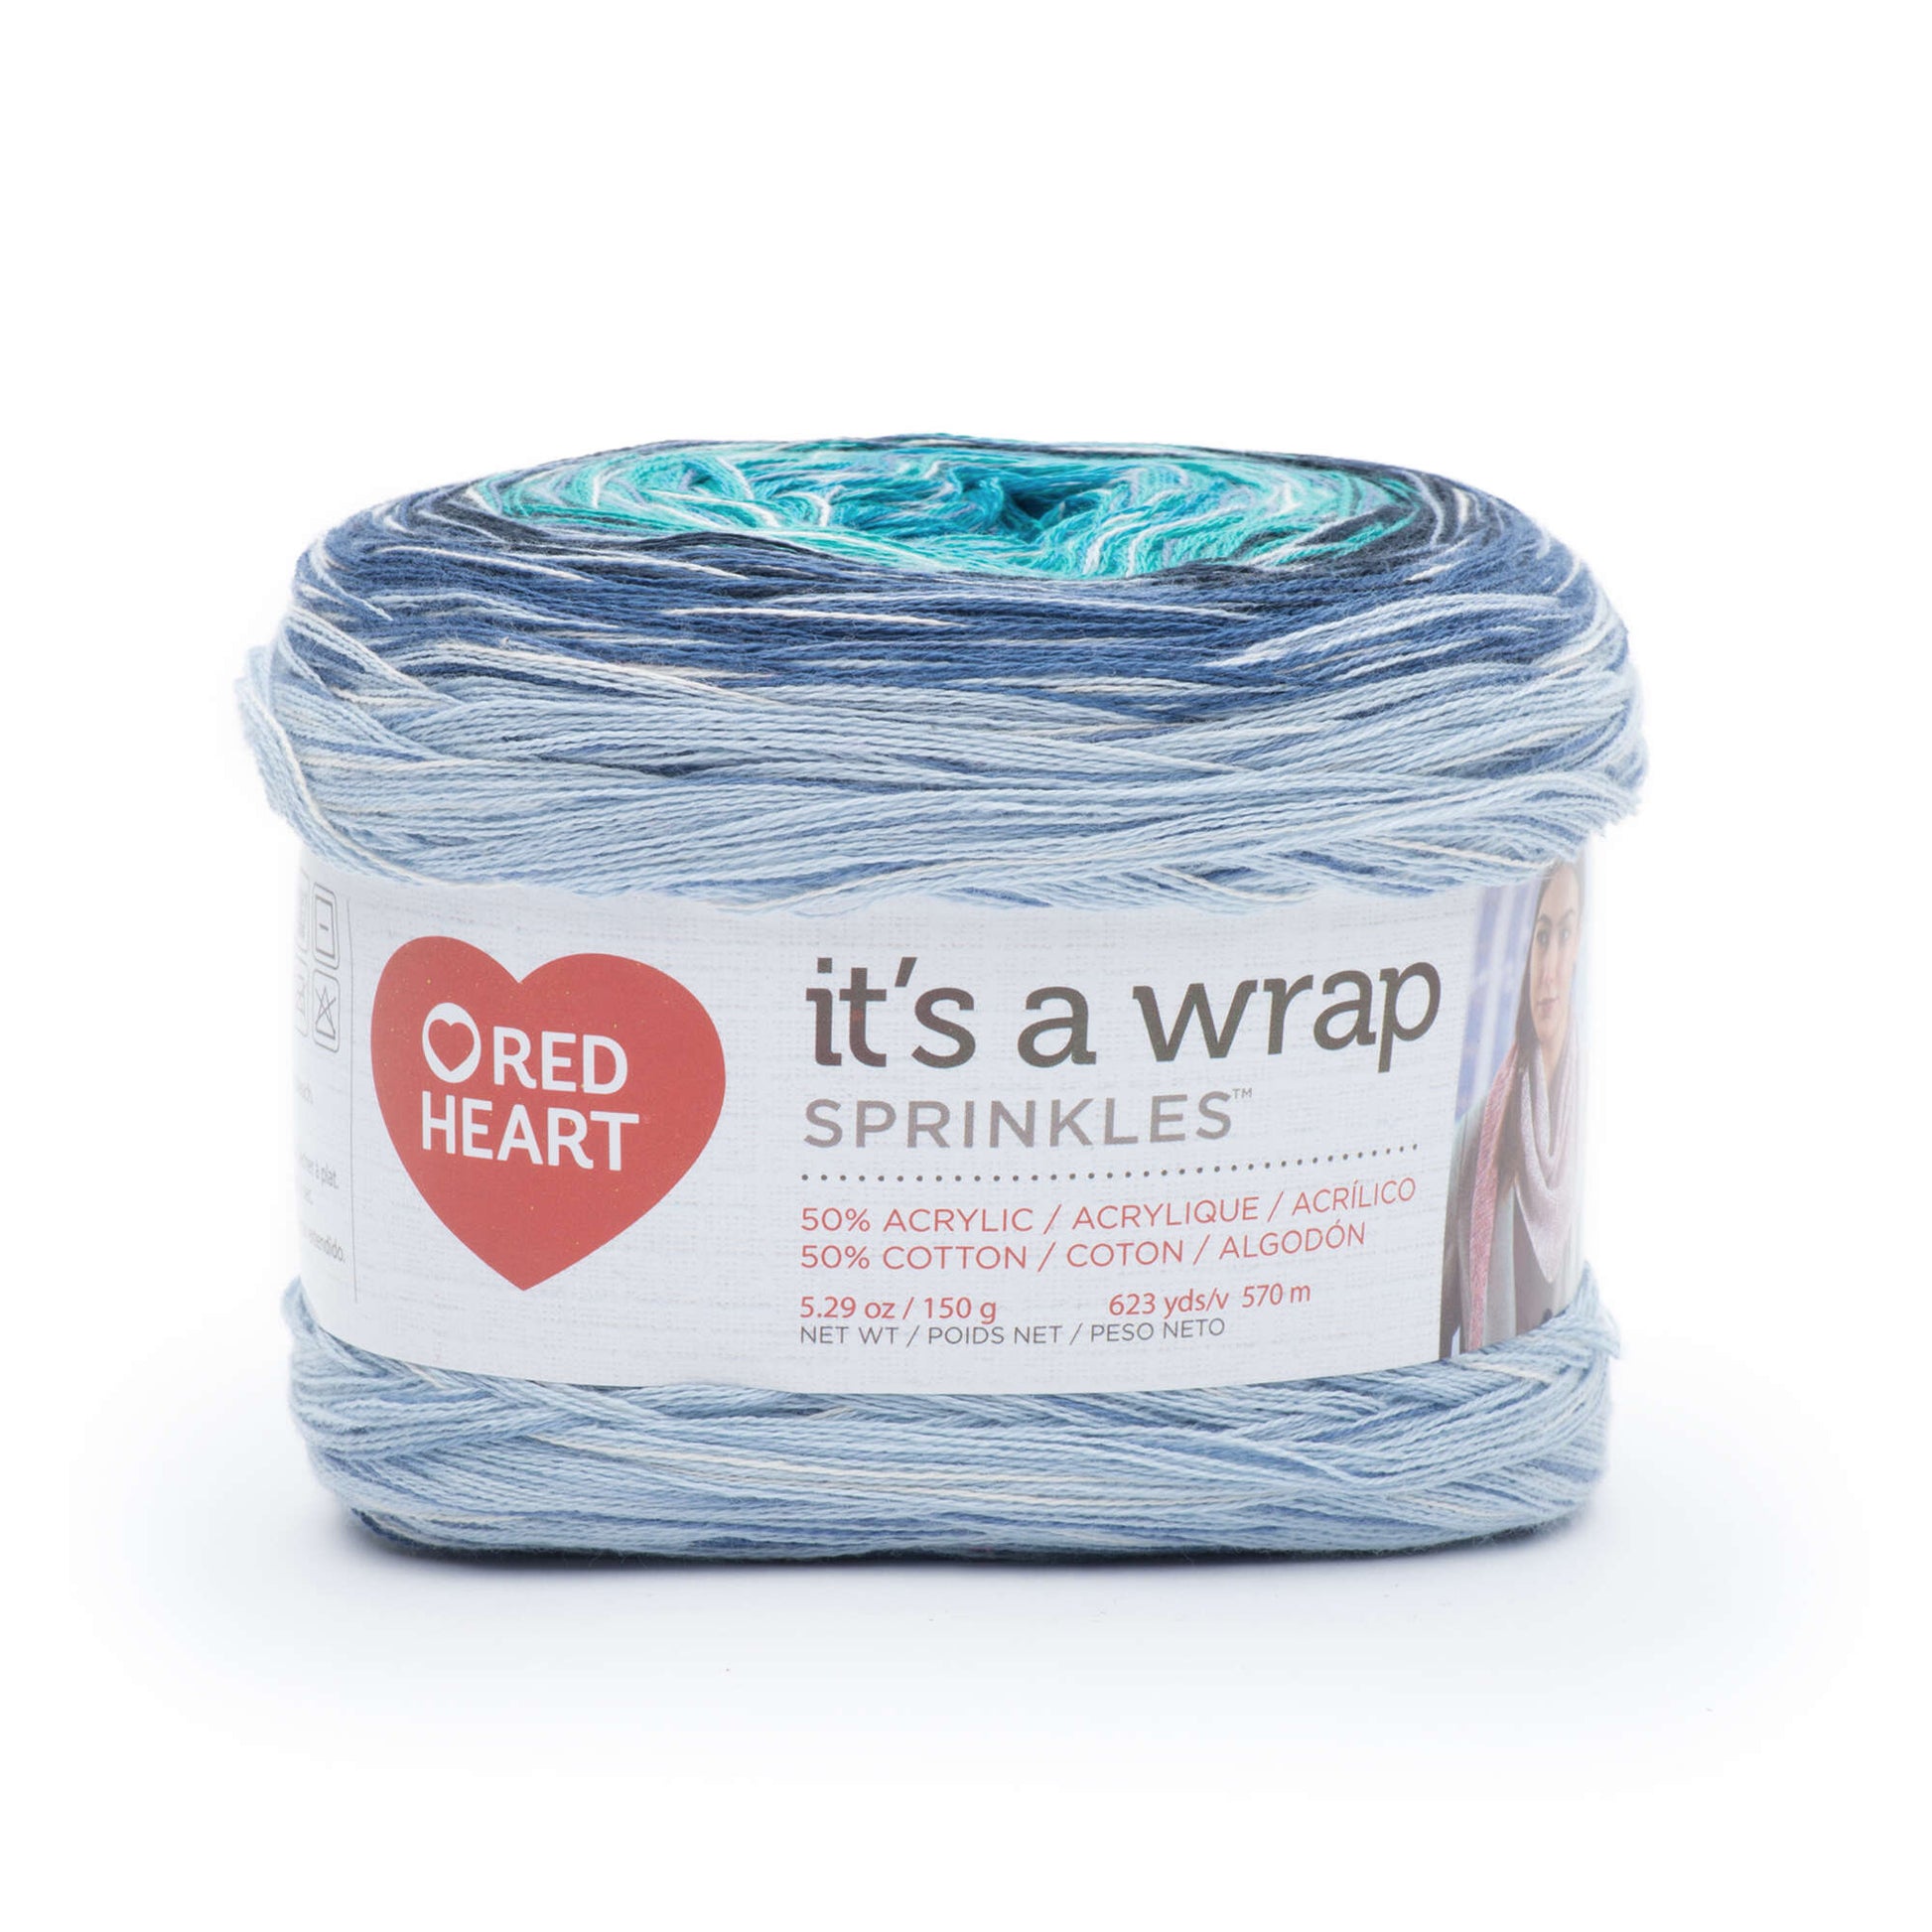 Red Heart It's a Wrap Sprinkles Yarn (150G/5.3oz) - Discontinued shades